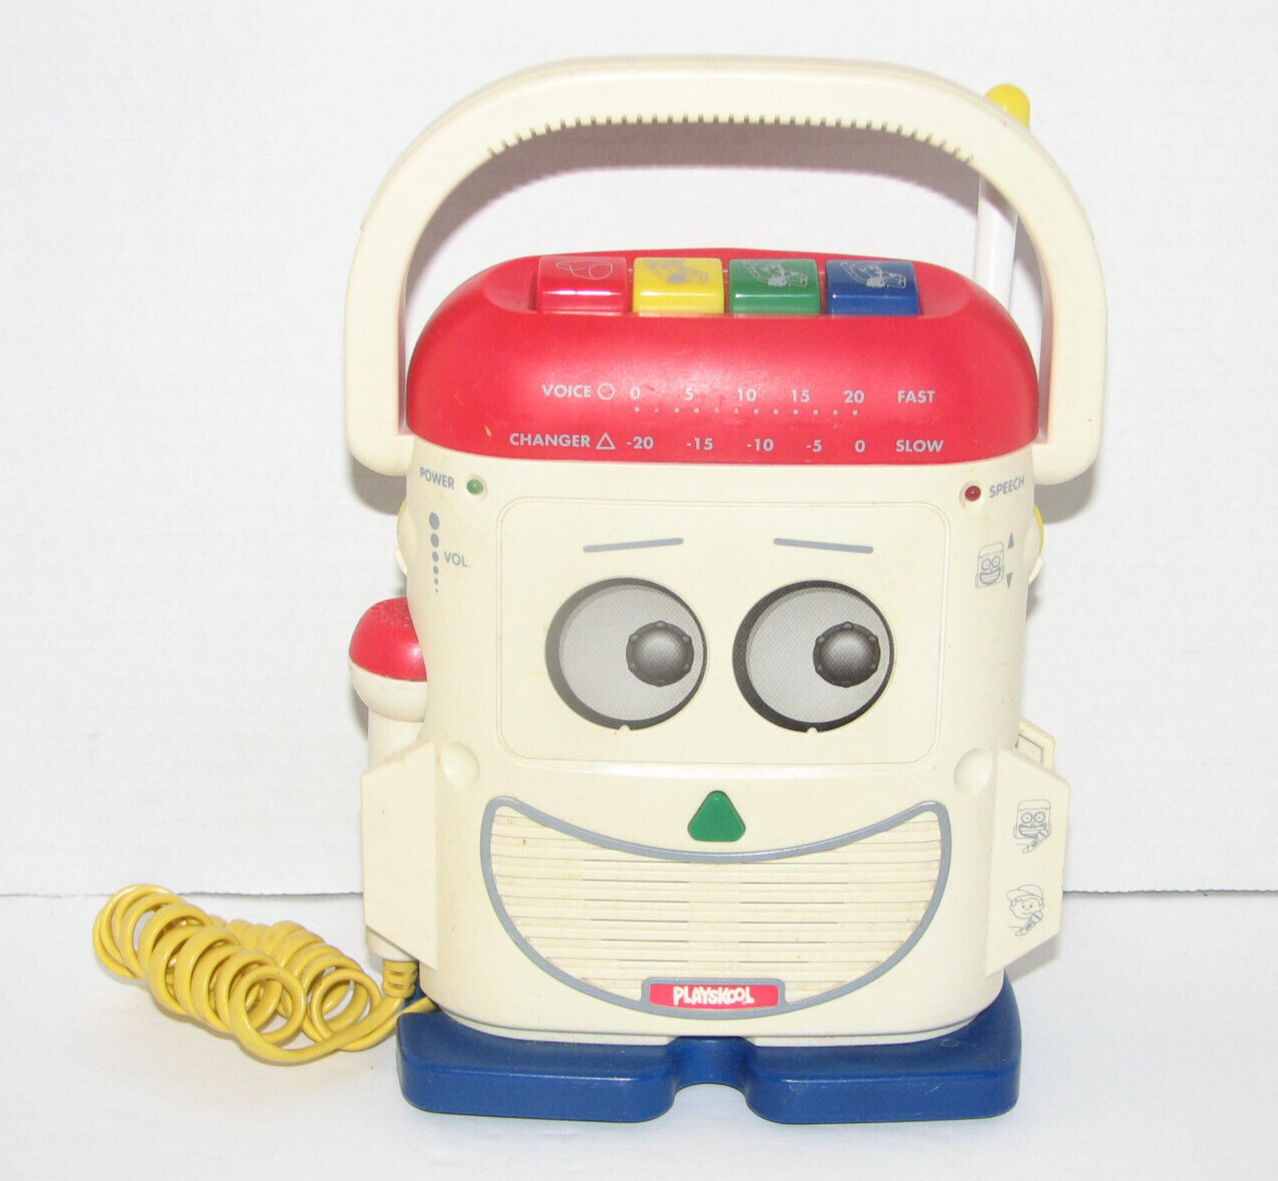 Playskool Mr. Mike Voice Changer Tape Recorder Toy Story TS-468